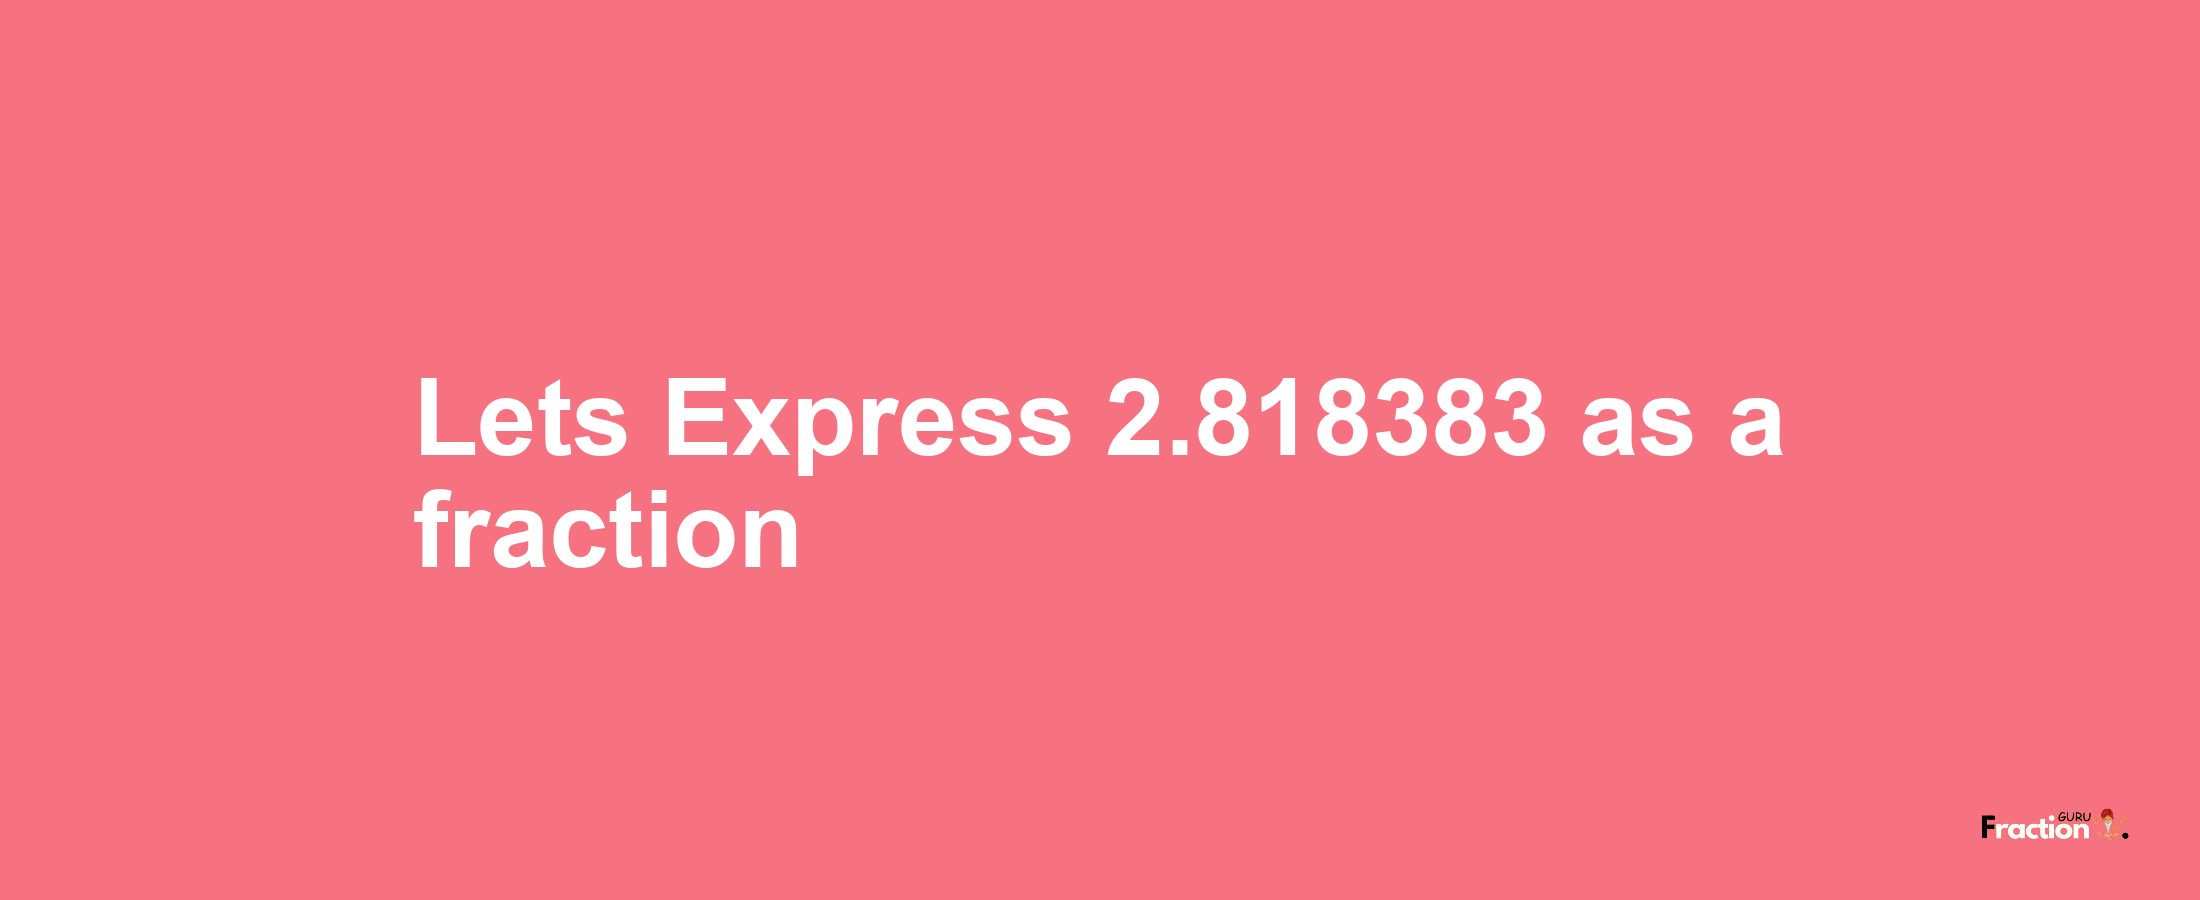 Lets Express 2.818383 as afraction